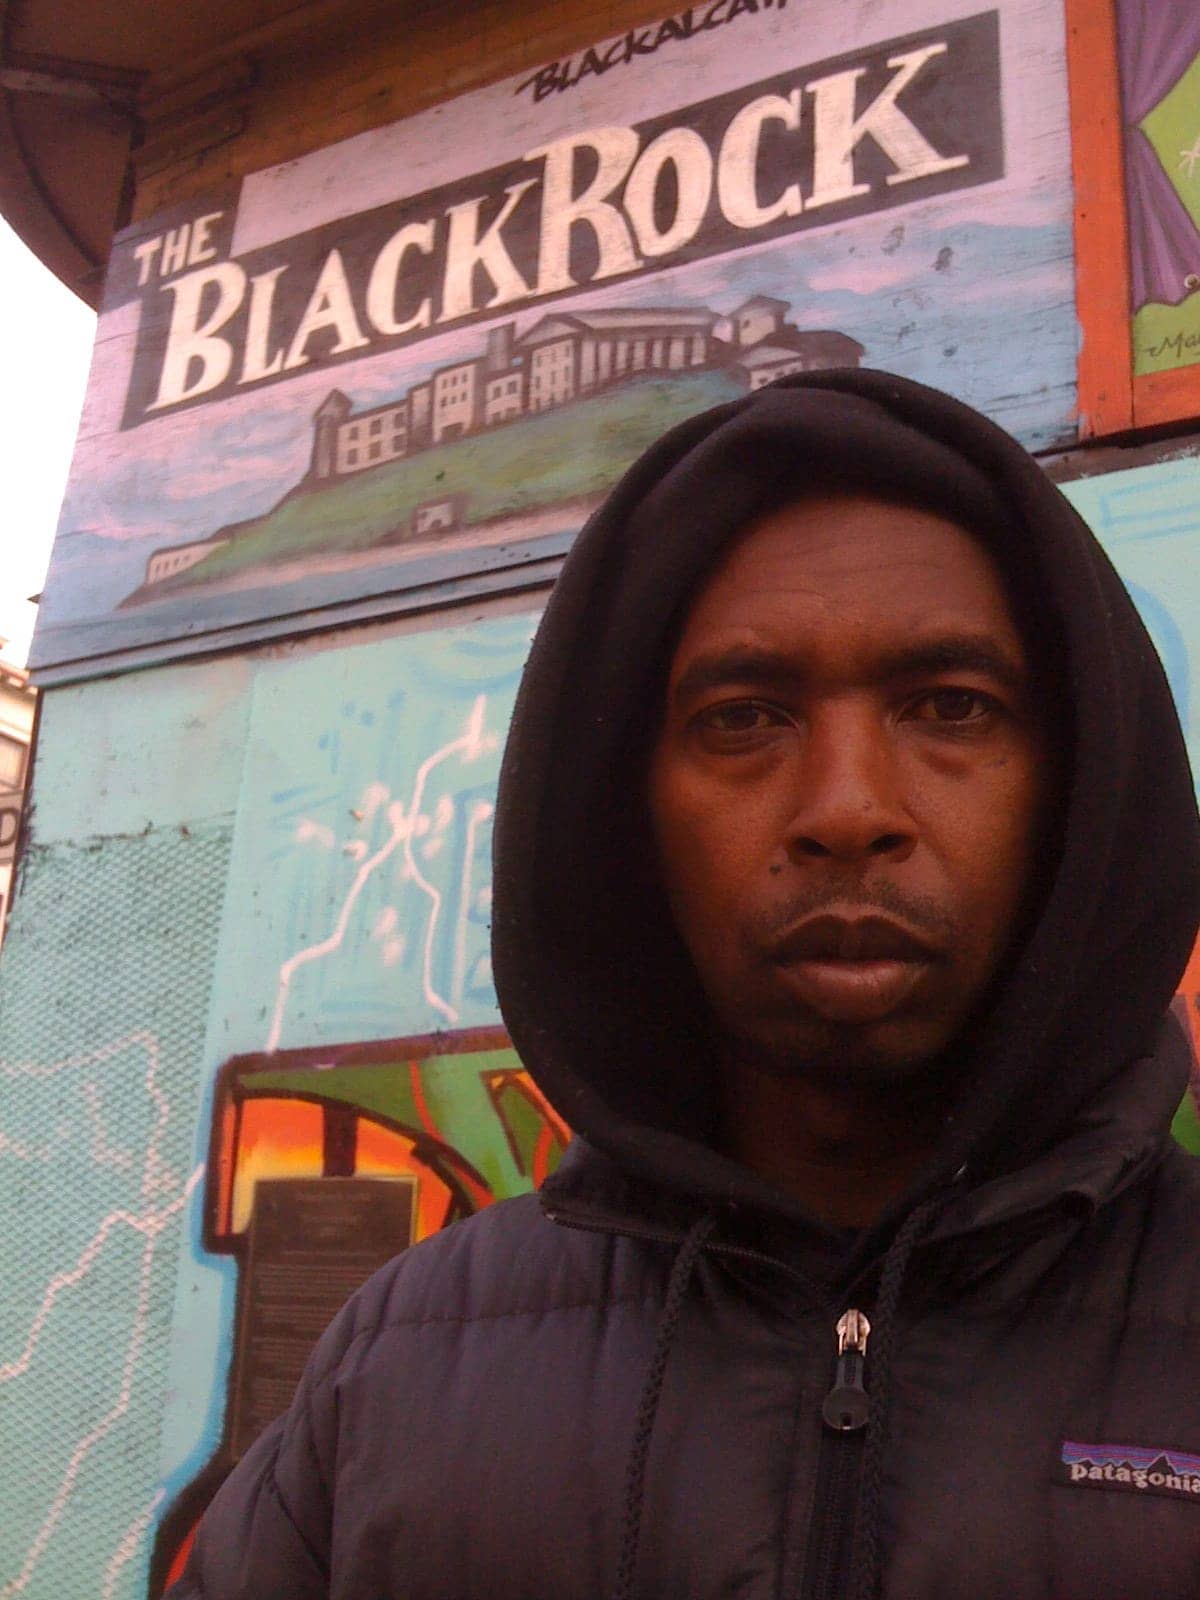 Kevin-Epps-stands-in-front-of-small-mural-for-The-Black-Rock, Filmmaker Kevin Epps releases new book, ‘Black Alcatraz’, Culture Currents 